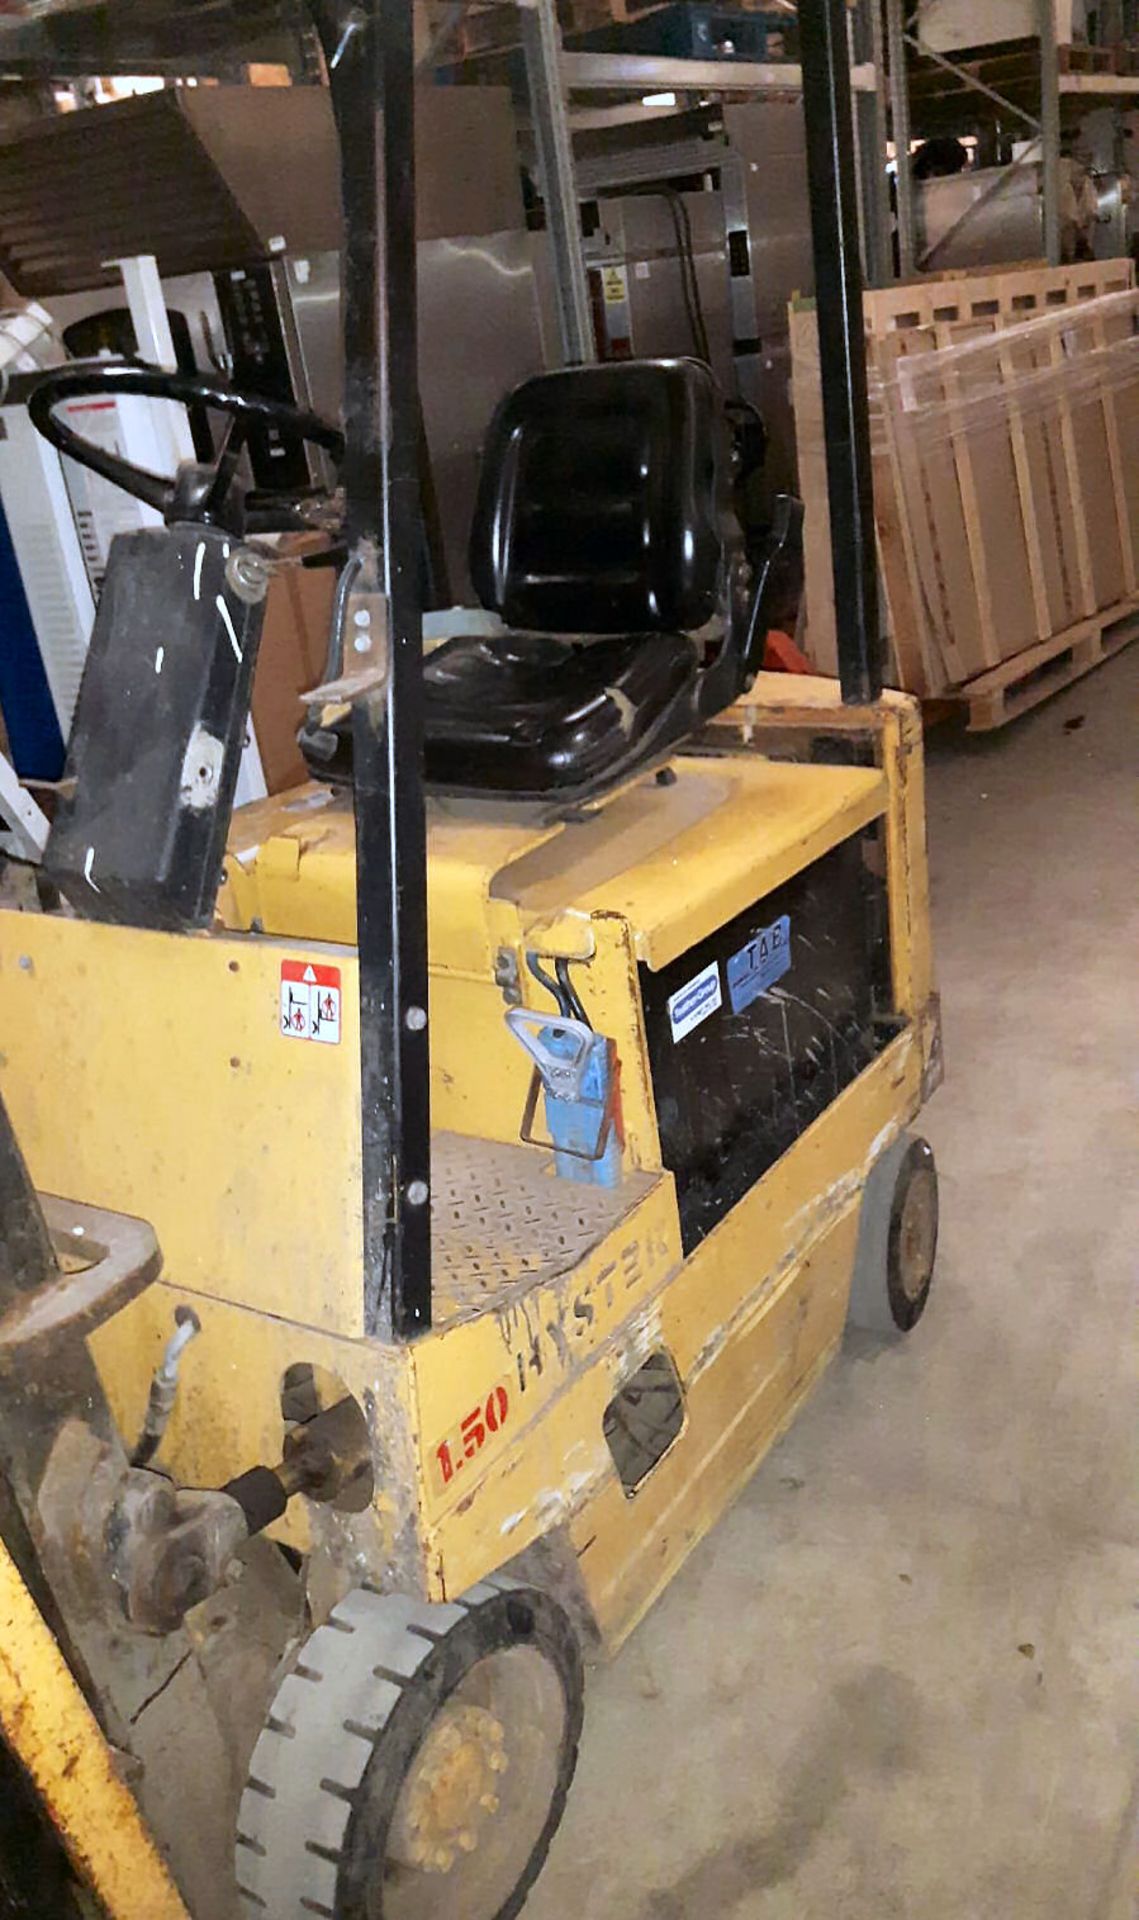 1988 Hyster 1200Kg Electric Counterbalance Forklift Truck - 1451 Hours - PLEASE READ DESCRIPTION - - Image 25 of 28